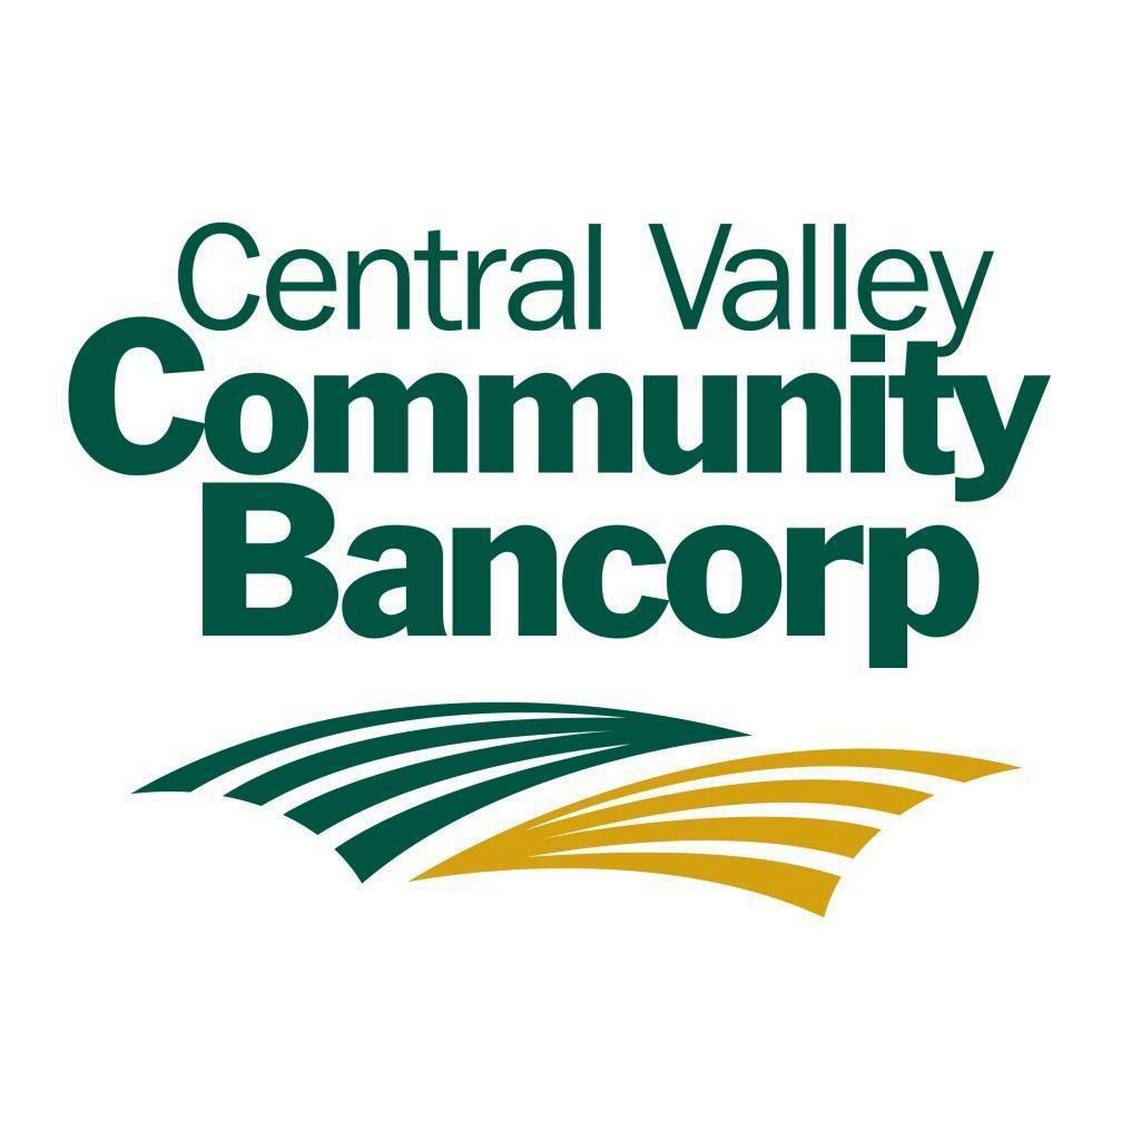 Central Valley Community Bancorp